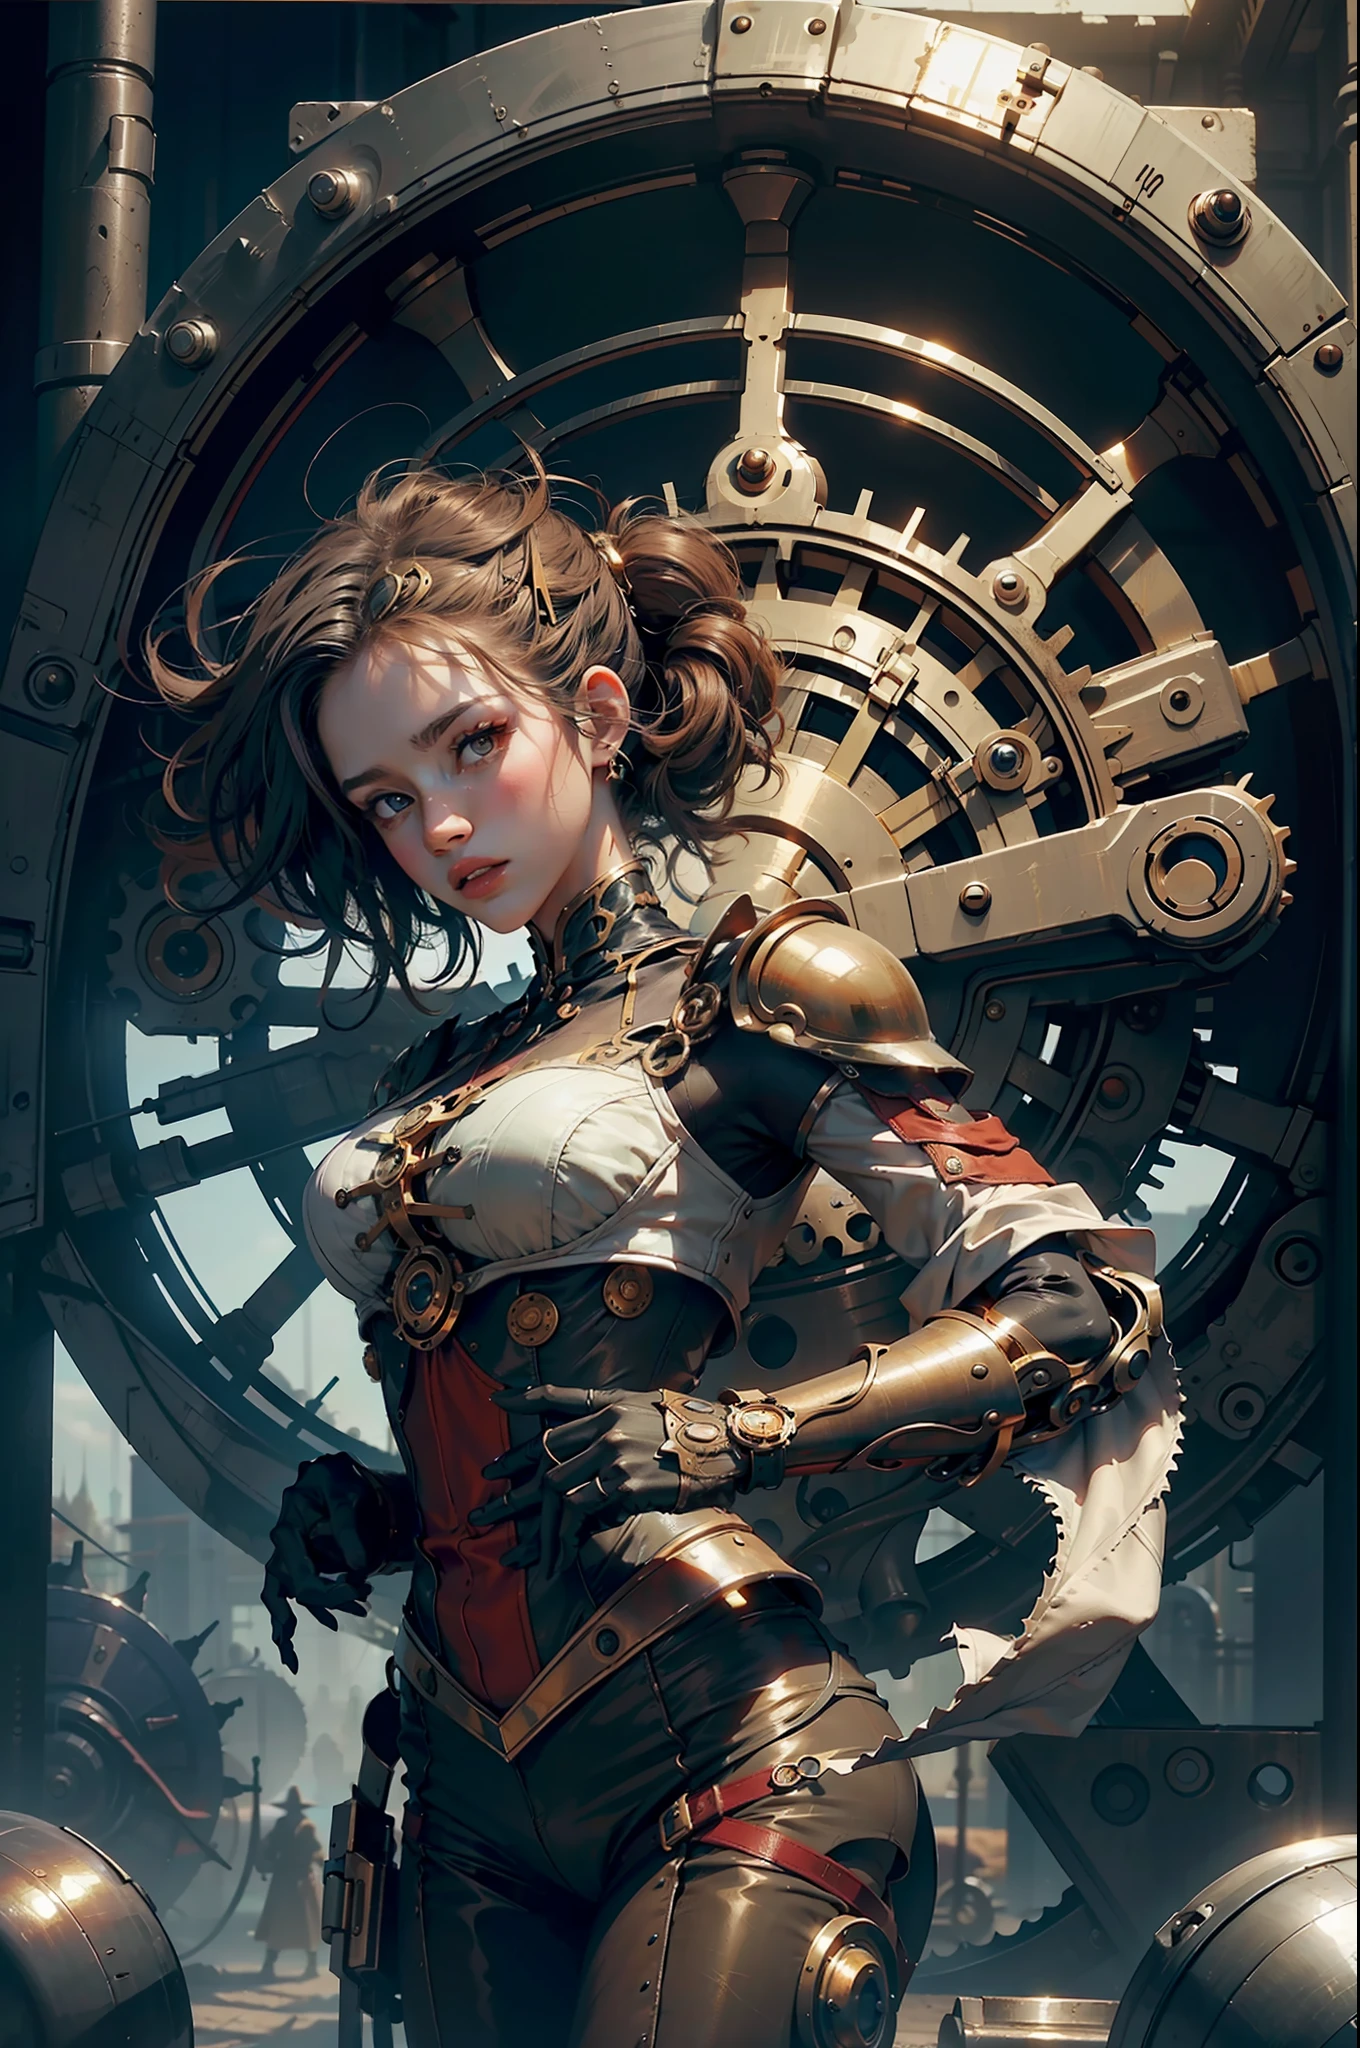 steampunc, ((masutepiece)), Best Quality, nffsw, retinas, ccurate, ((Anatomically correct)), Textured skin, Super Detail, high details, High quality, awardwinning, Best Quality, hight resolution, 8K, drop shadow, anaglyph, stereograms, Atmospheric perspective, surrealism, depth of fields, reflective light, Backlighting, outside border, move chart, out of frame, Dutch Angle, Dutch Angle, Cowboy Shot, 8K, Super Detail, ccurate, one girls, A dark-haired, length hair, bangss, Twin-tailed, red blush, longeyelashes, Solid Circle Eyes, ((Very shiny skin)), (juicy skin), Very shiny clothes, outside of house, Complex mechanical devices, Gigantic Cogwheel, Countless gears, Lots of plumbing, Steam ejection, Many instruments,actionpose